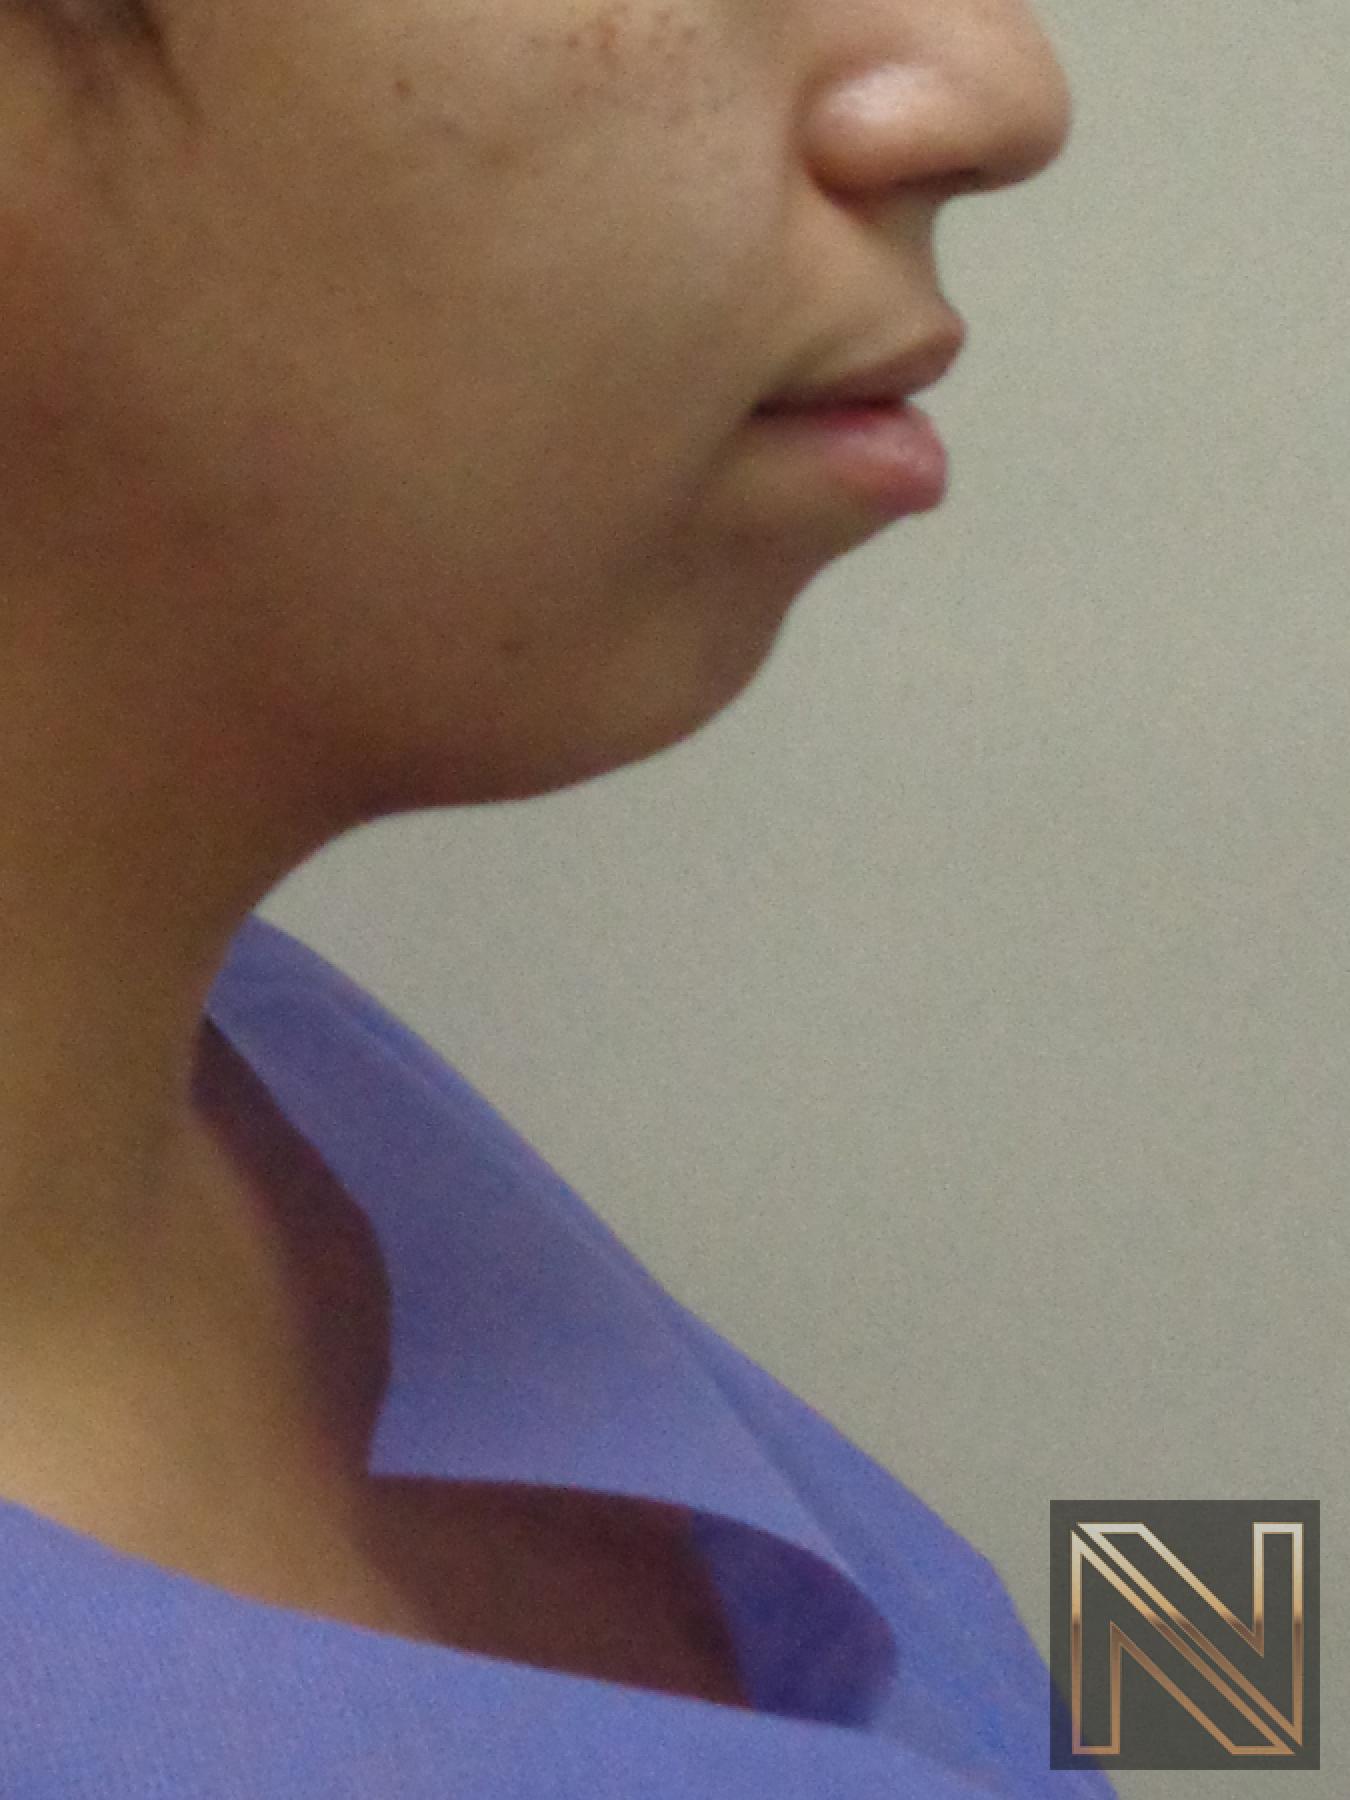 Chin Augmentation: Patient 1 - Before 1